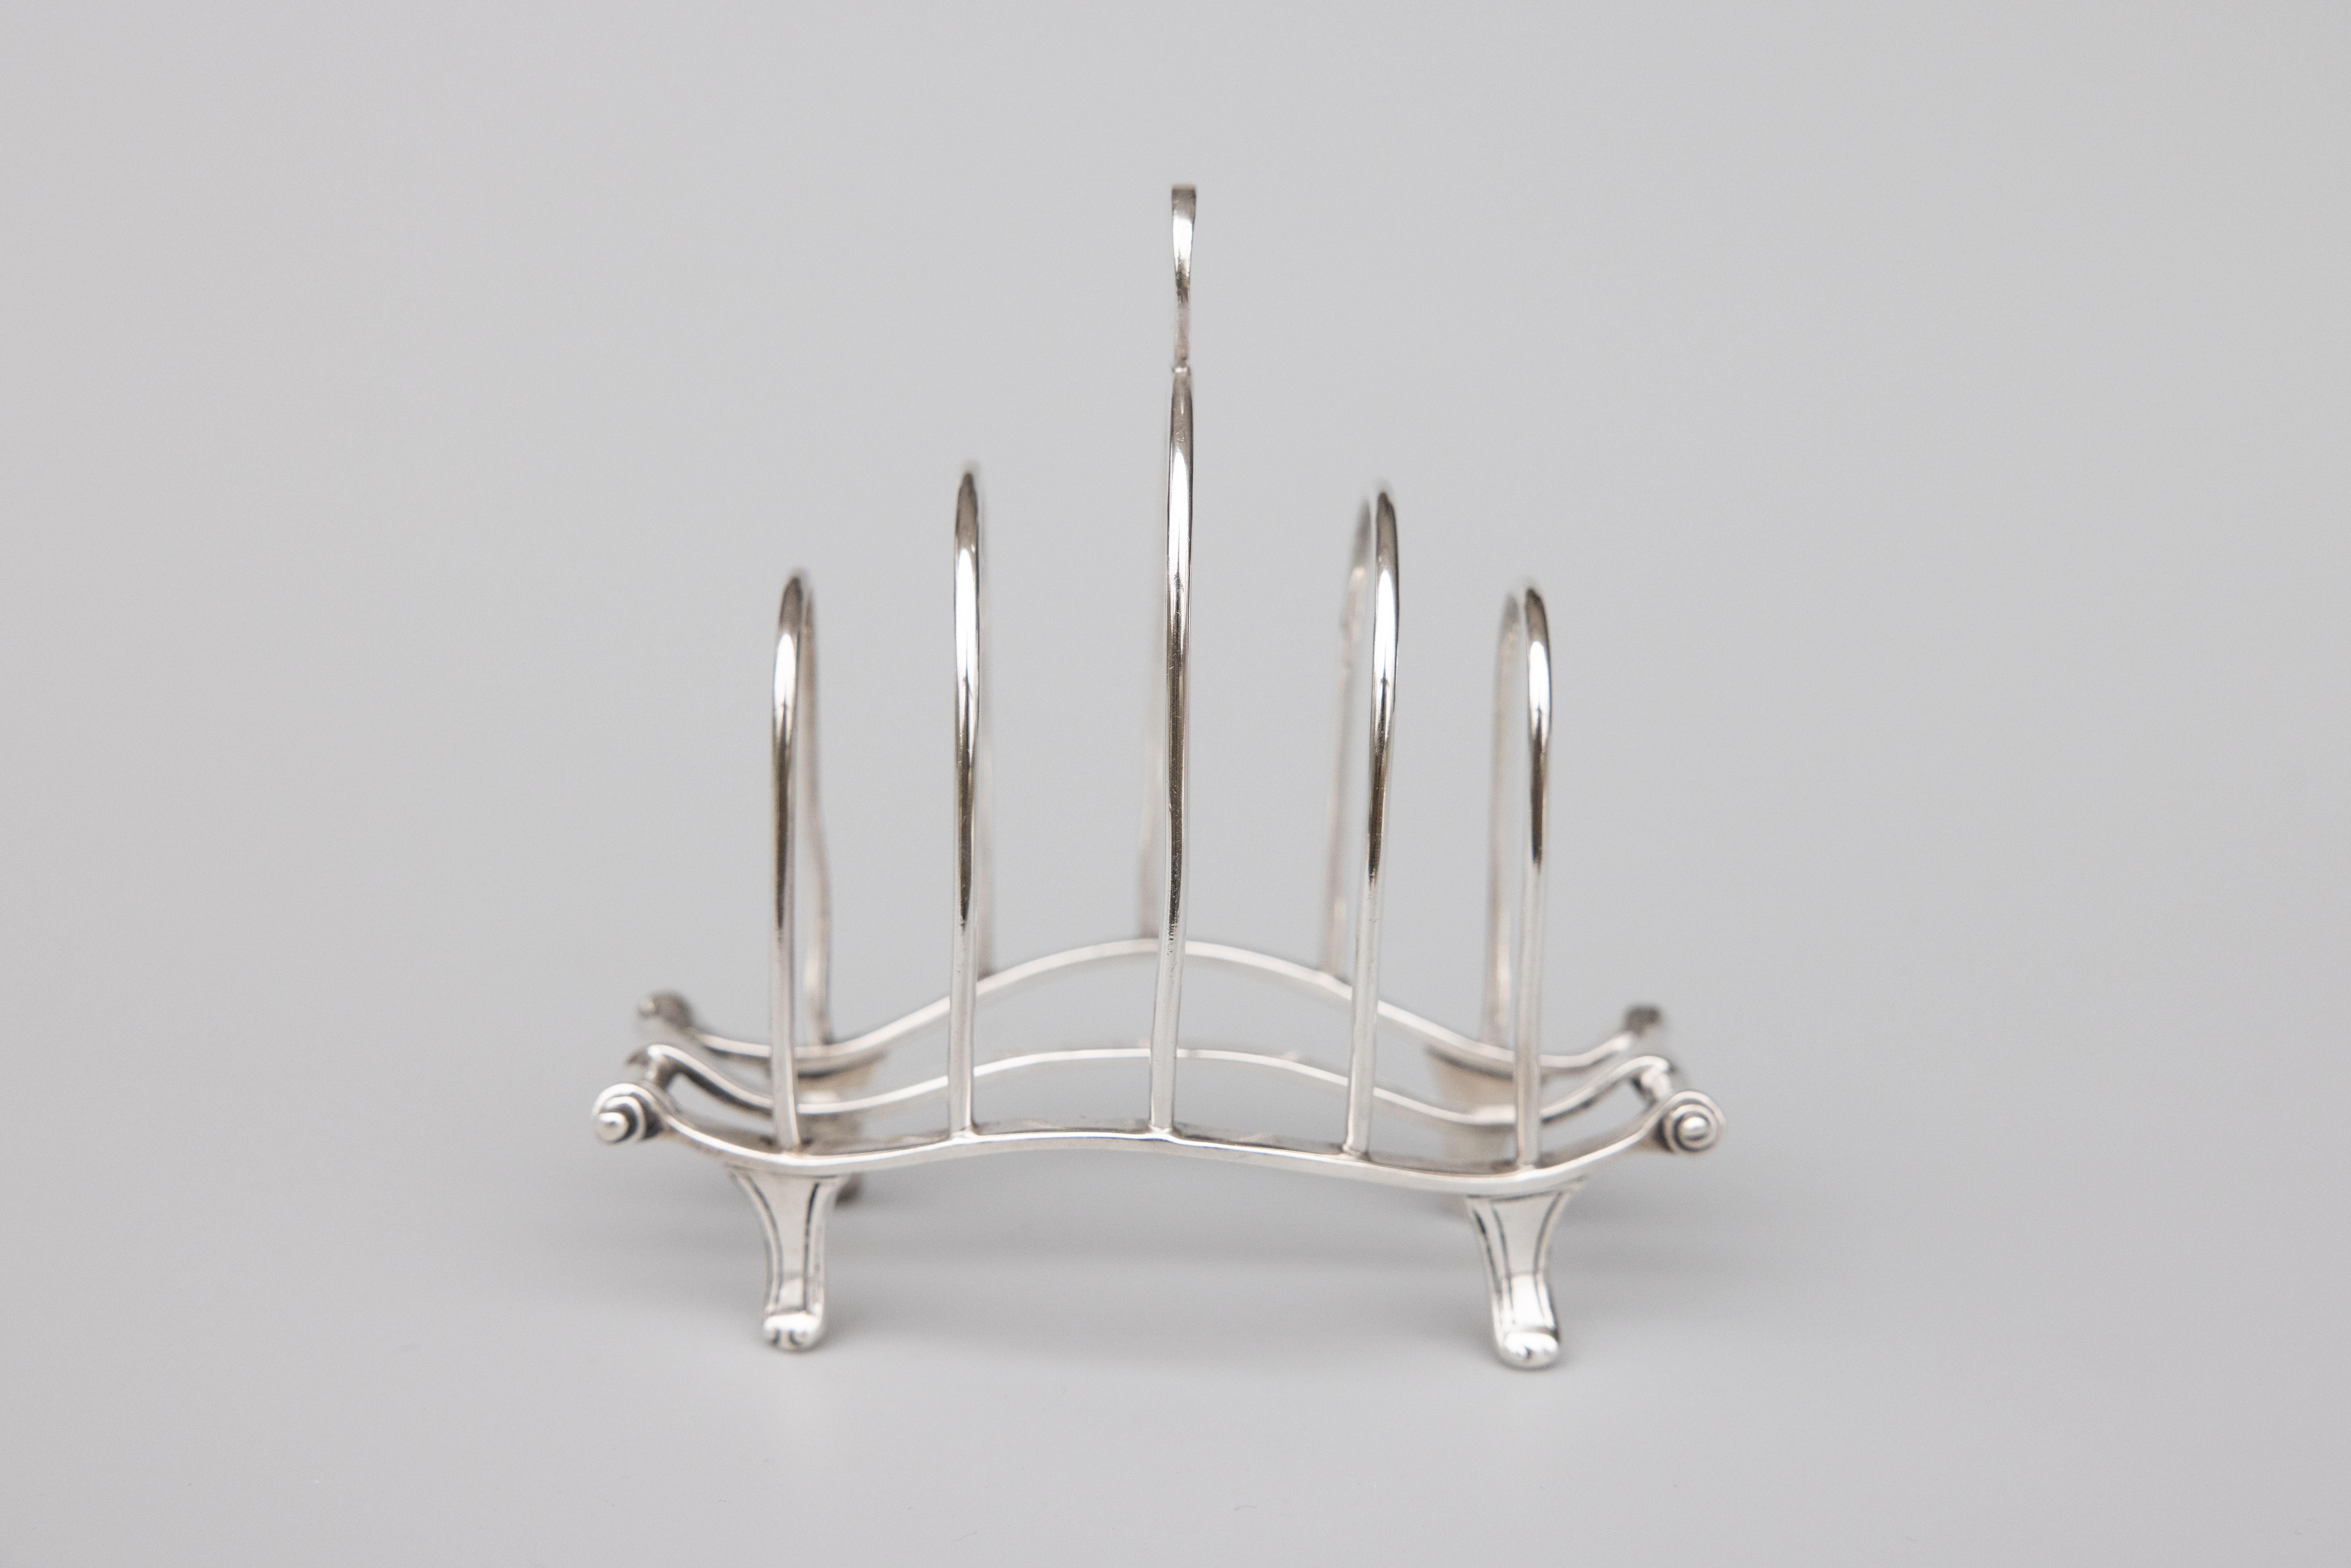 A superb antique English sterling silver four slice toast rack made by William Comyns & Sons Ltd in London, dated 1924. Hallmarks on reverse. This stunning toast rack has a lovely Art Deco design, ornate feet, and decorative finial. It would be